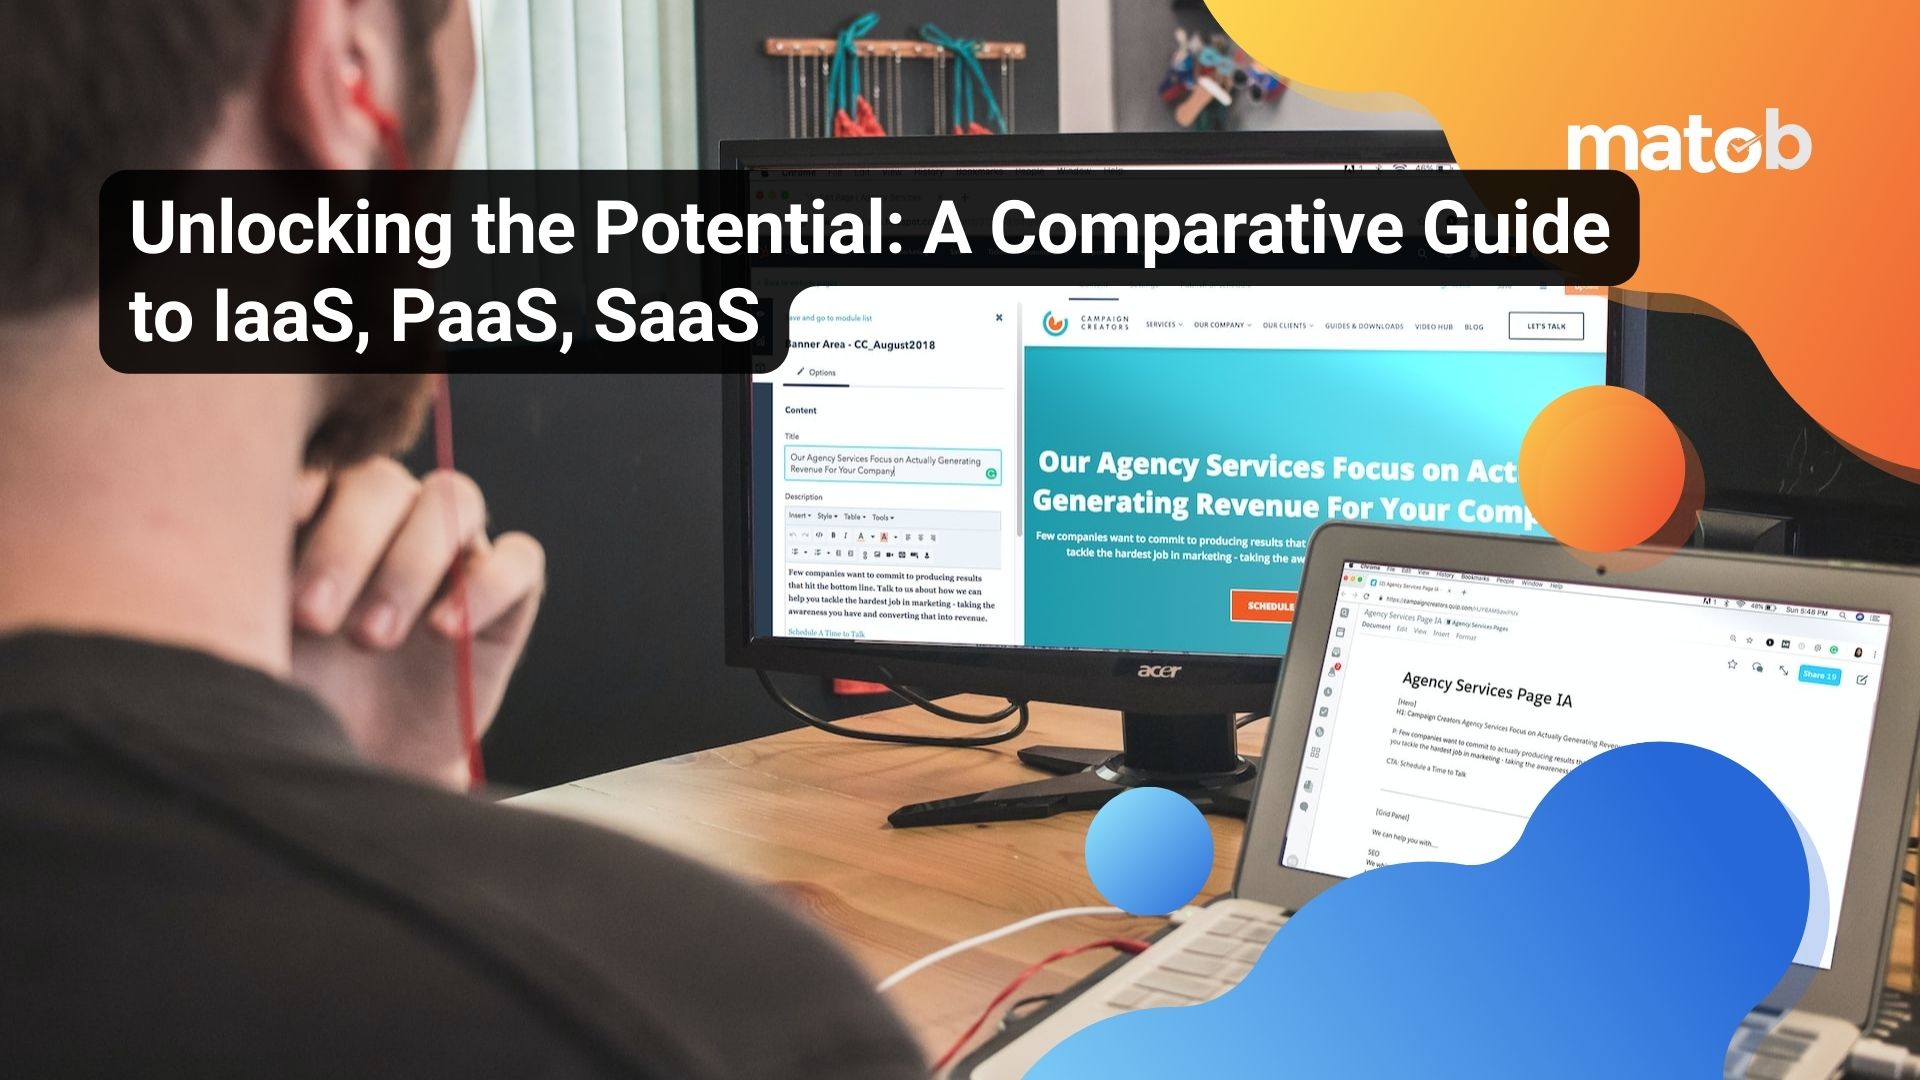 Unlocking the Potential: A Comparative Guide to IaaS, PaaS, SaaS